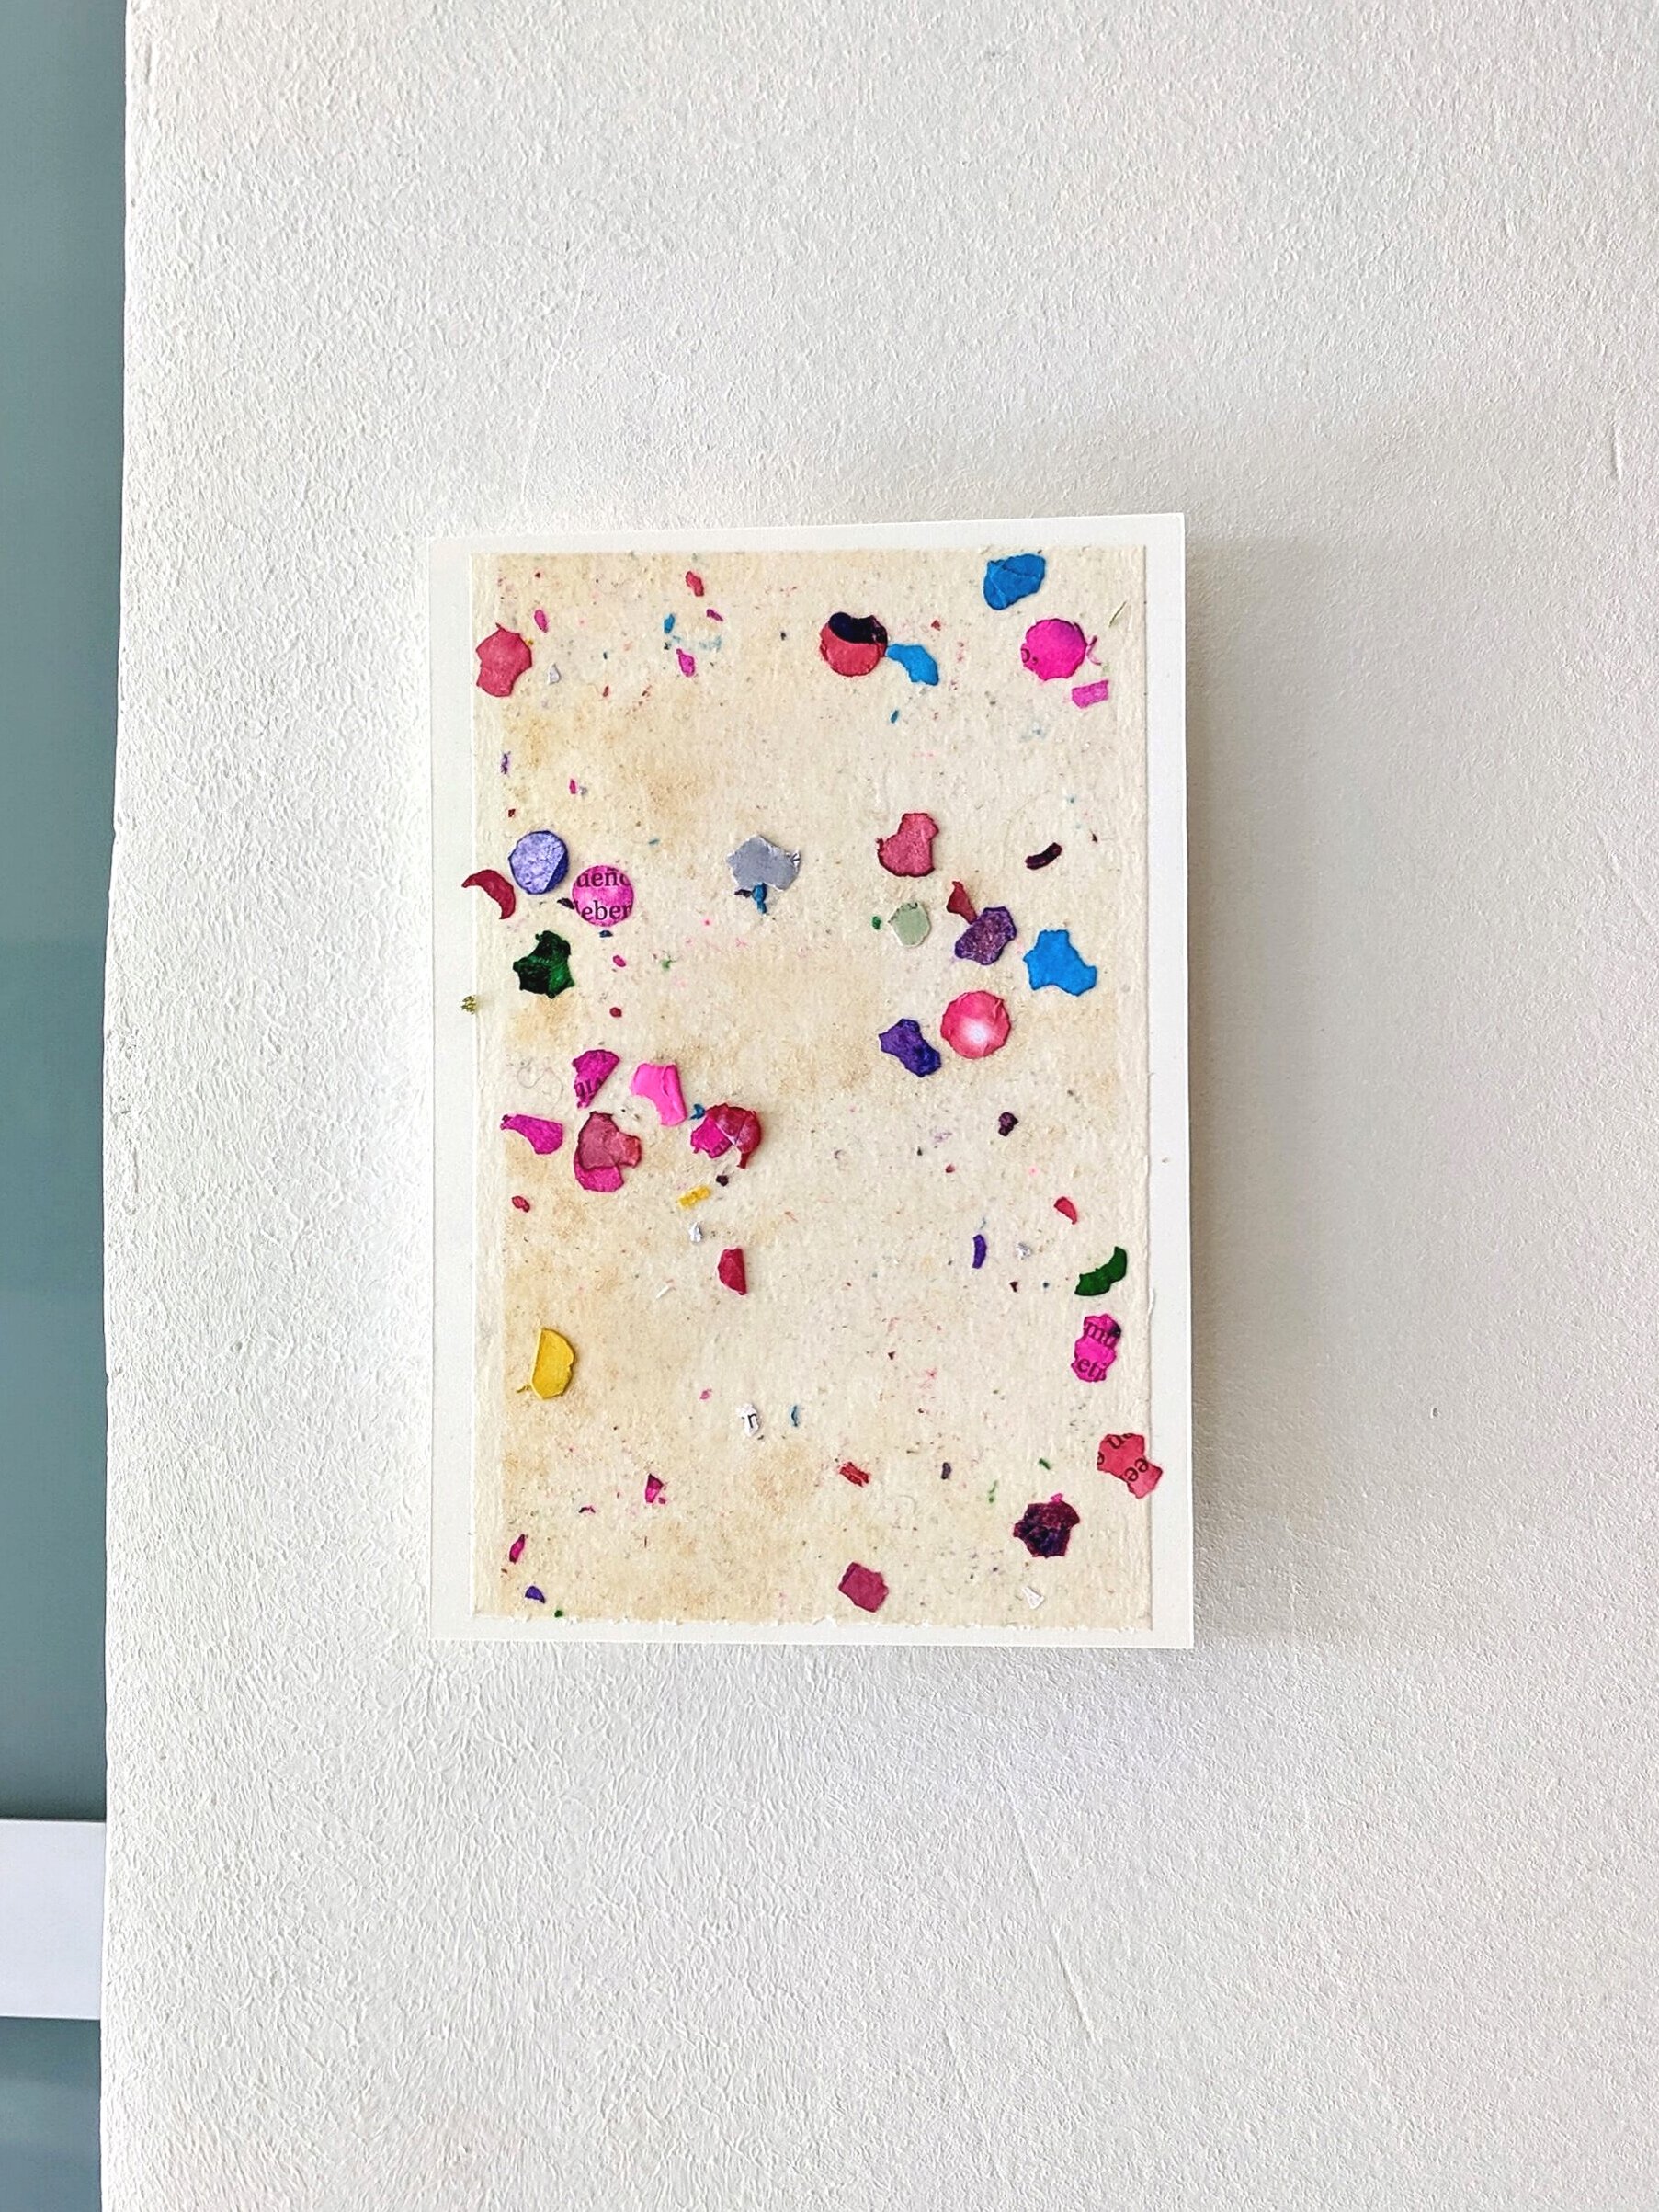   Dust Painting , 2019 Mexican confetti, sandstone on adhesive, mounted on paper 16 x 11 cm  private collection 